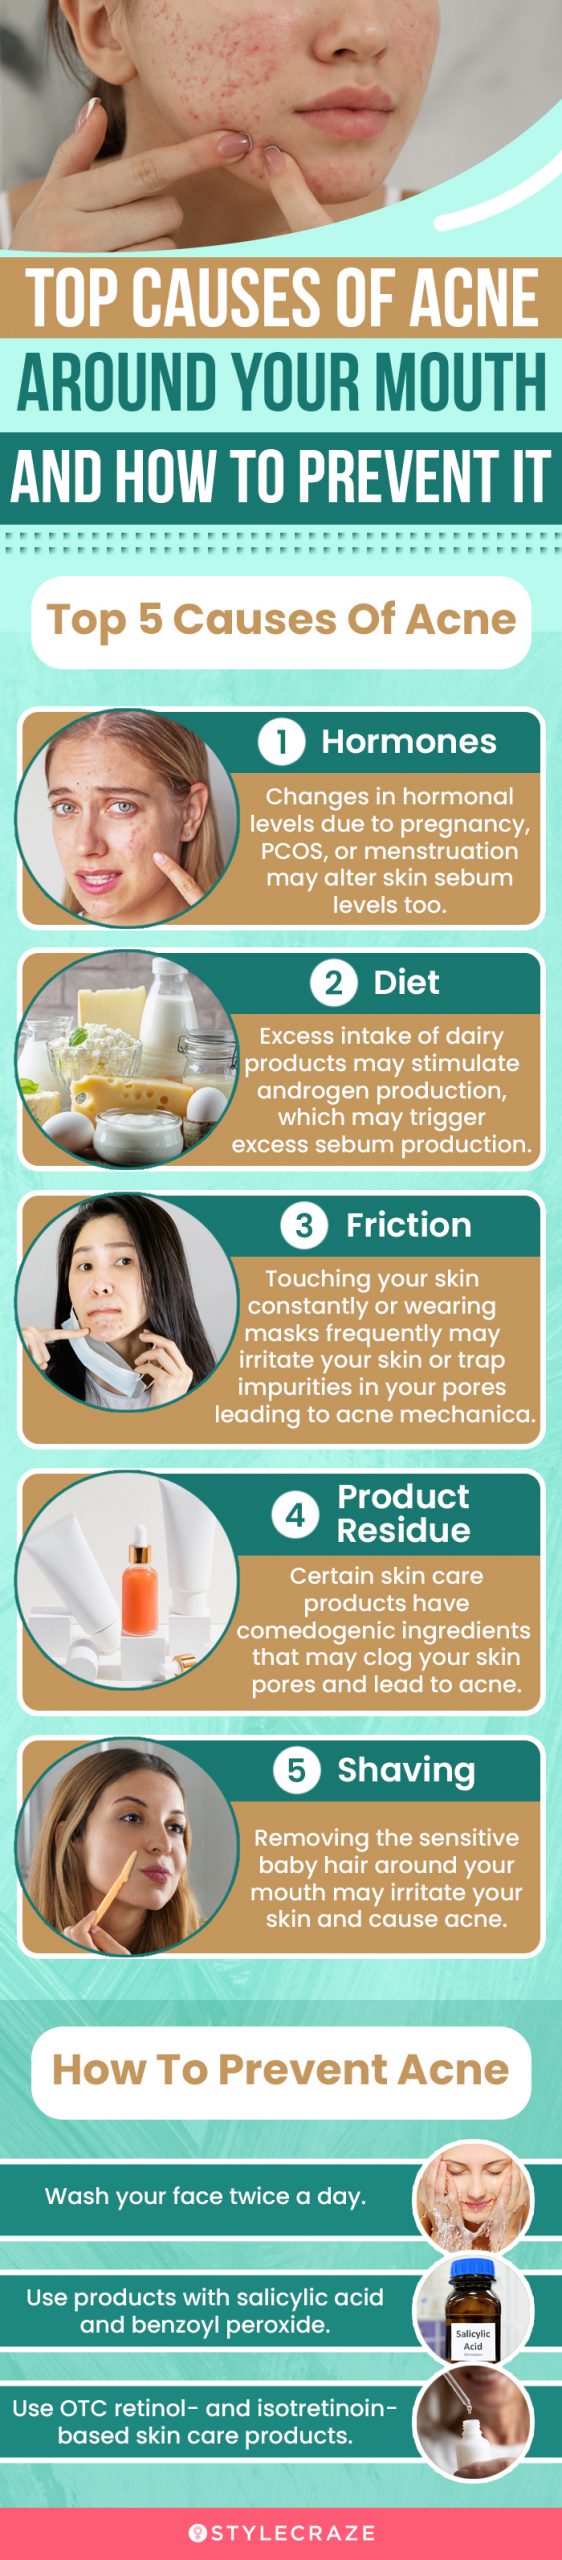 top causes of acne around your mouth and how to prevent it(infographic)